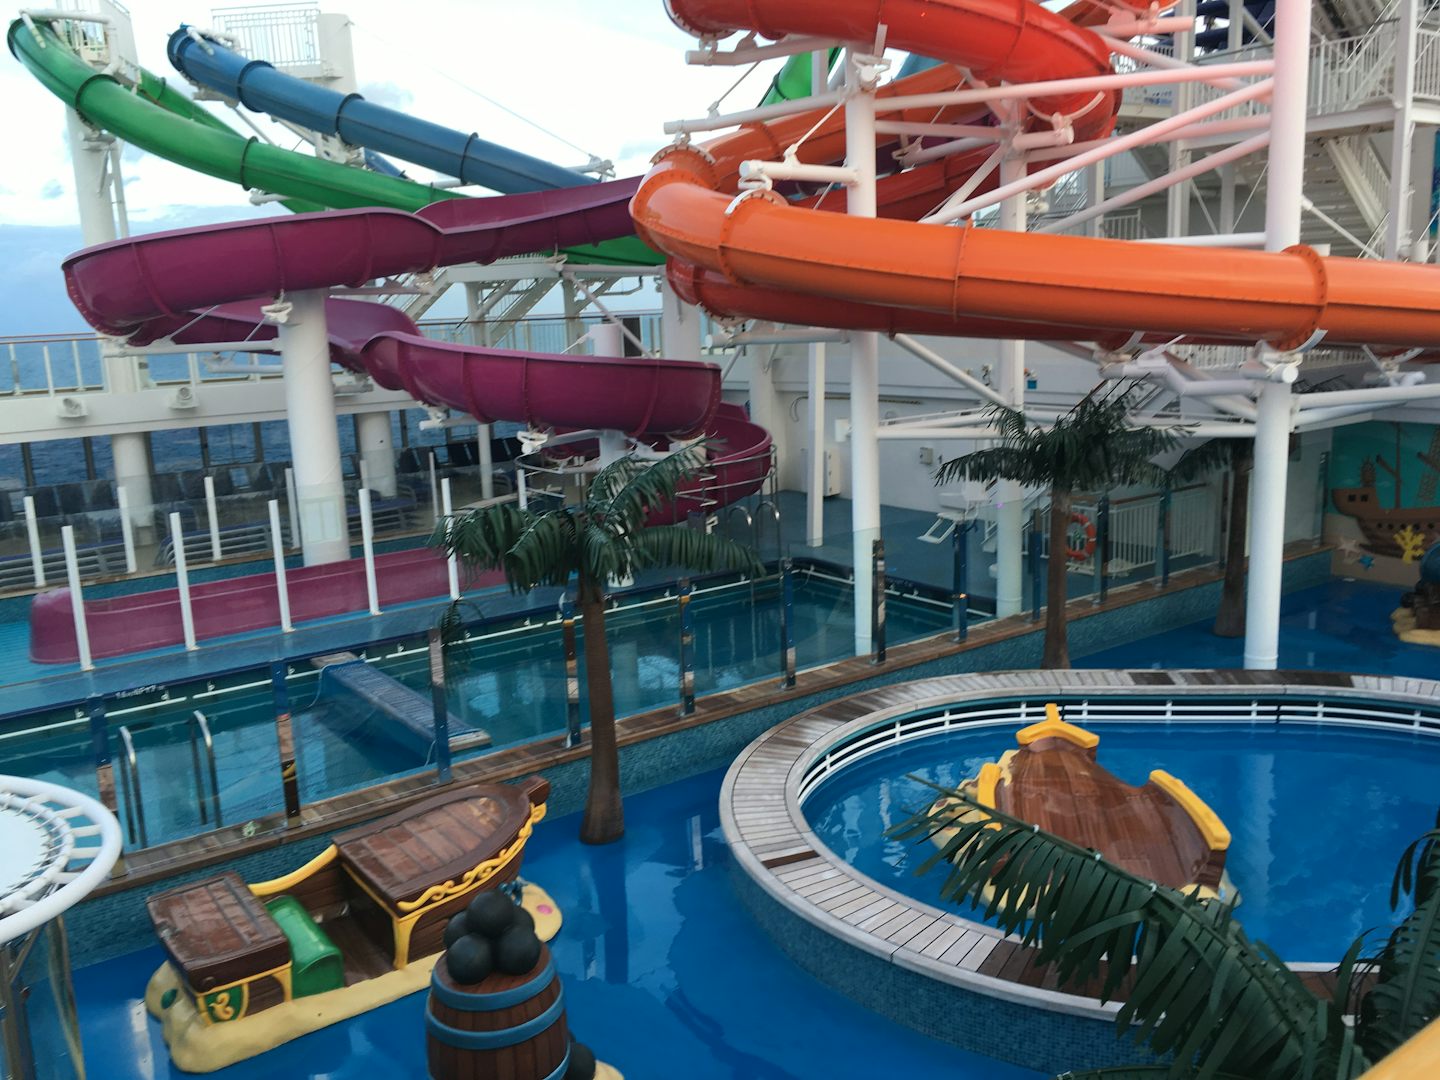 Water slides for the kids and adults and a splash pad for the younger ones.